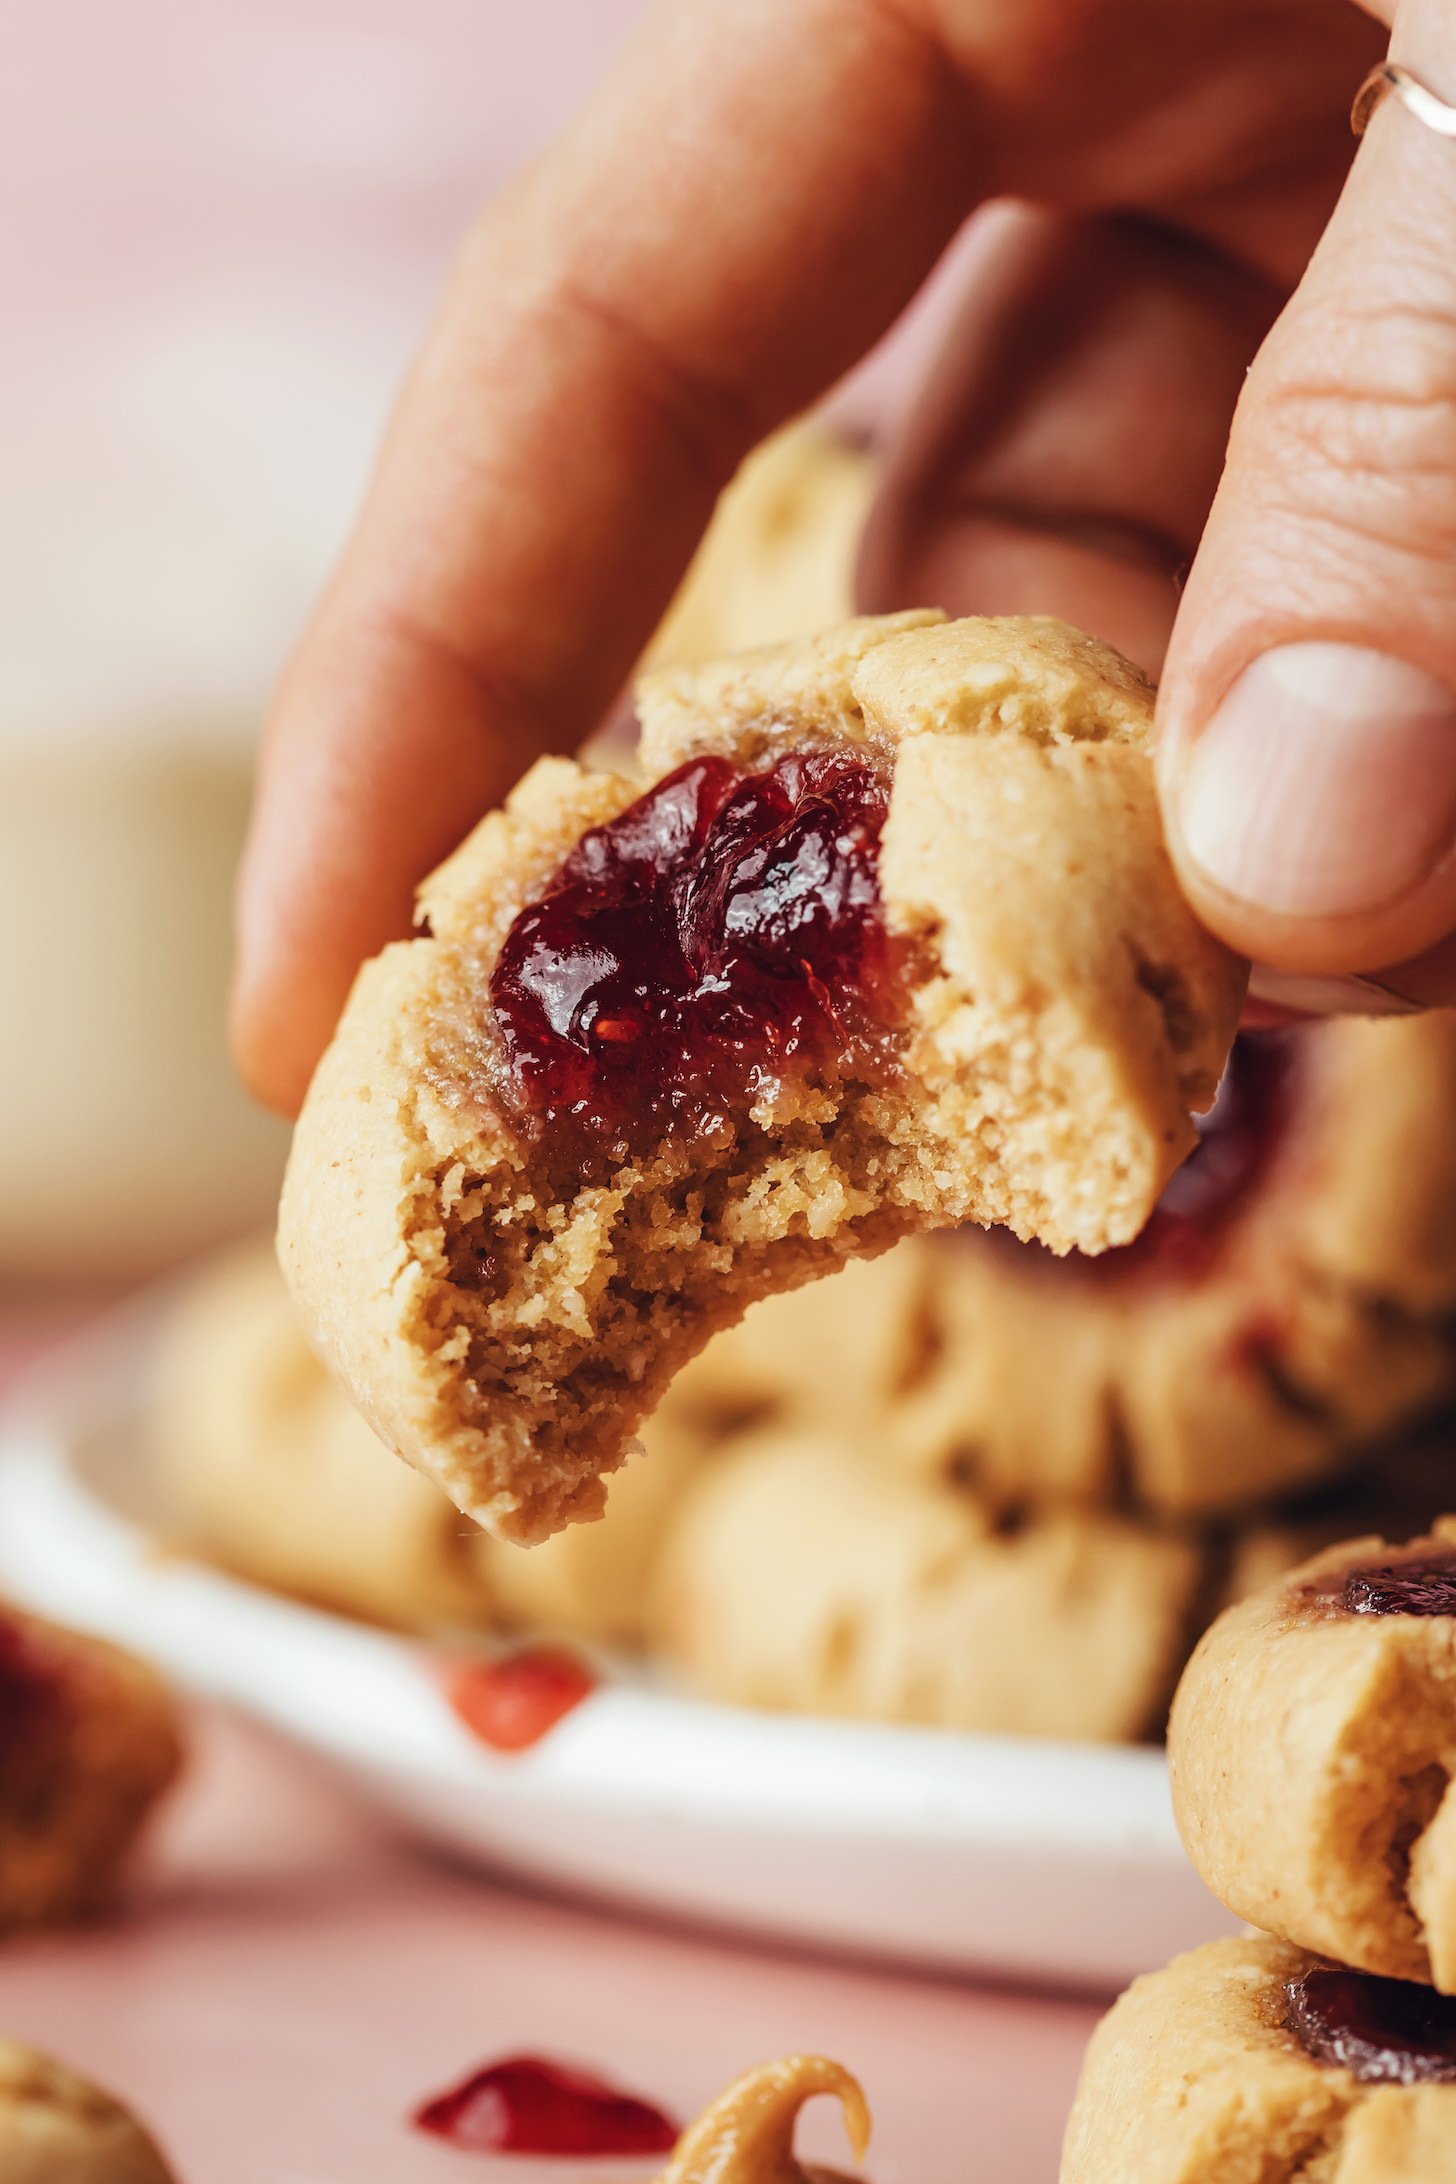 Holding up a partially eaten thumbprint cookie to show the tender, jam-filled center